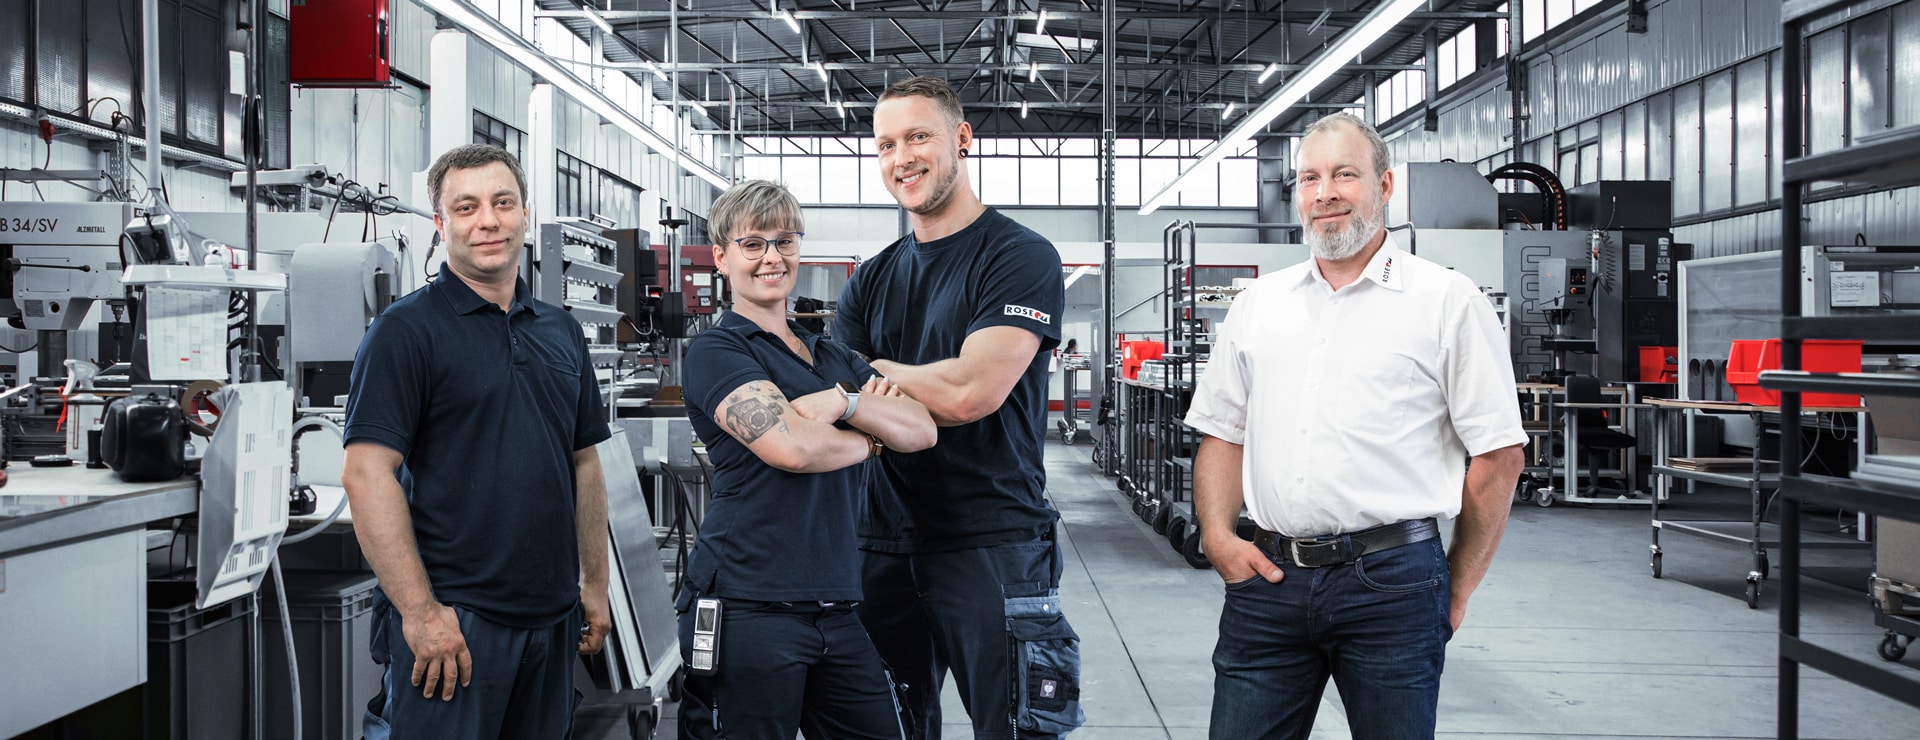 ROSE Systemtechnik's employees in Finow manufacture support arms, device carriers and control enclosures.